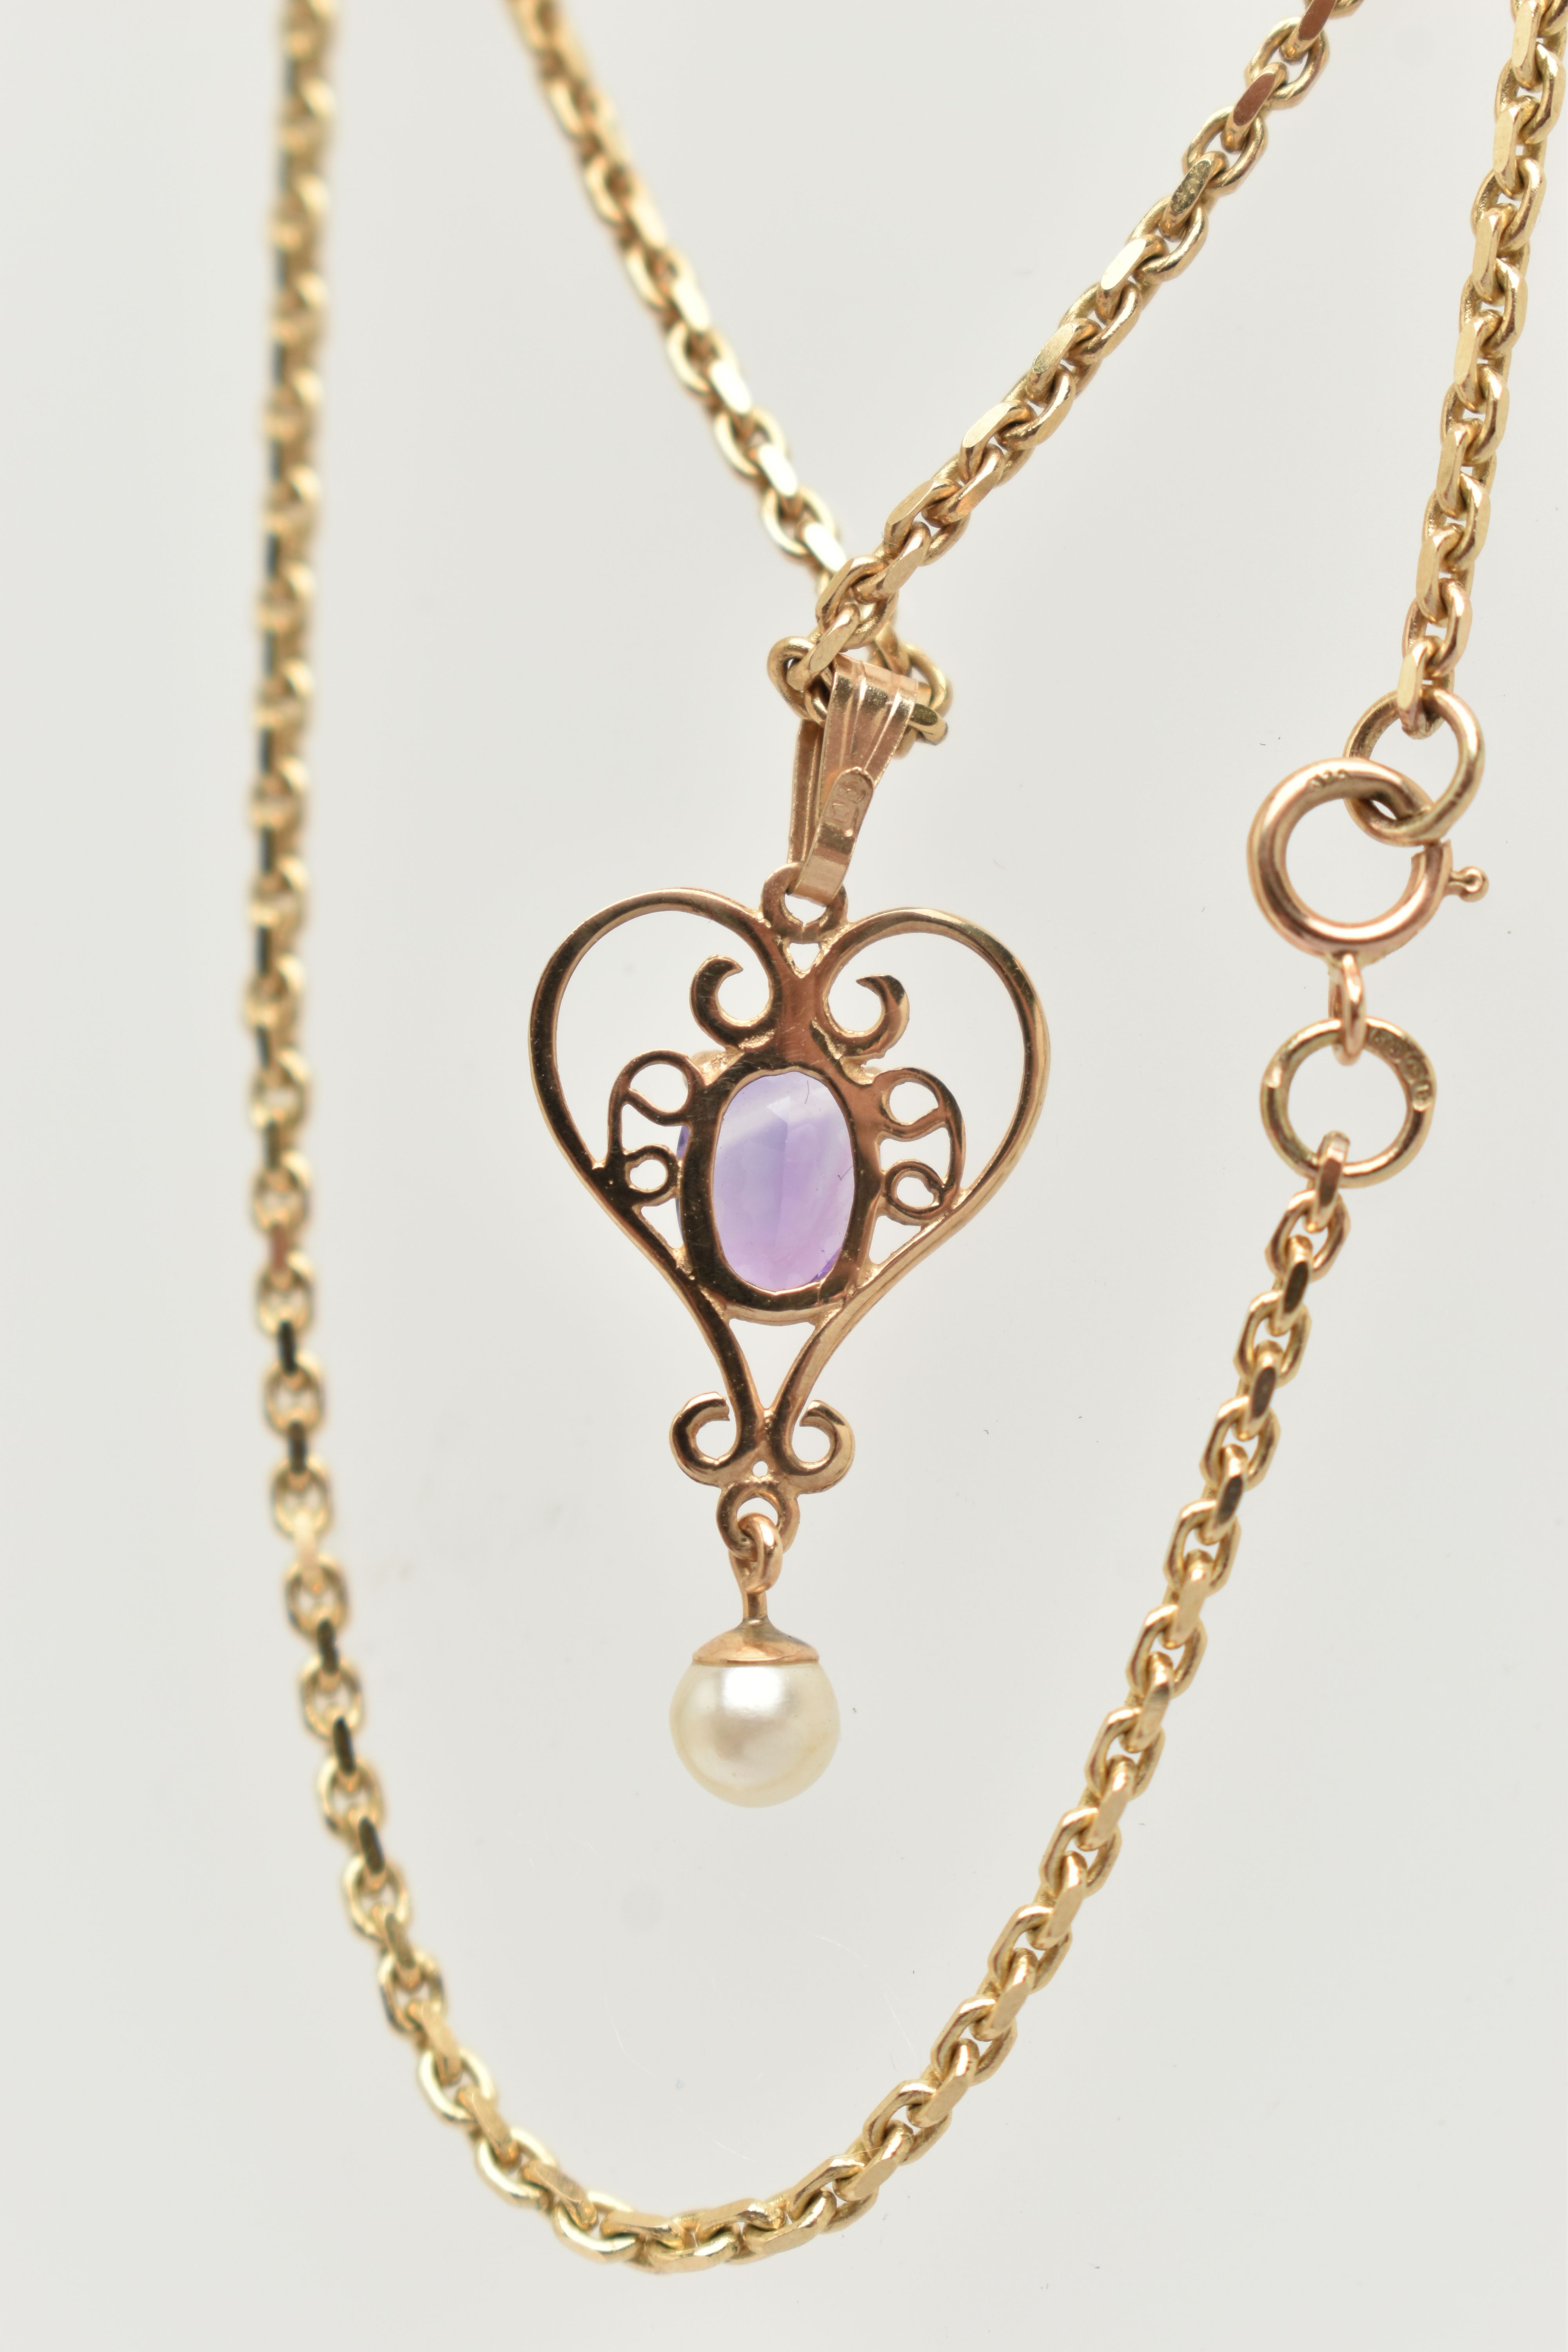 A 9CT GOLD PENDANT NECKLACE, heart shape scrolling pendant set with an oval cut amethyst four claw - Image 4 of 4